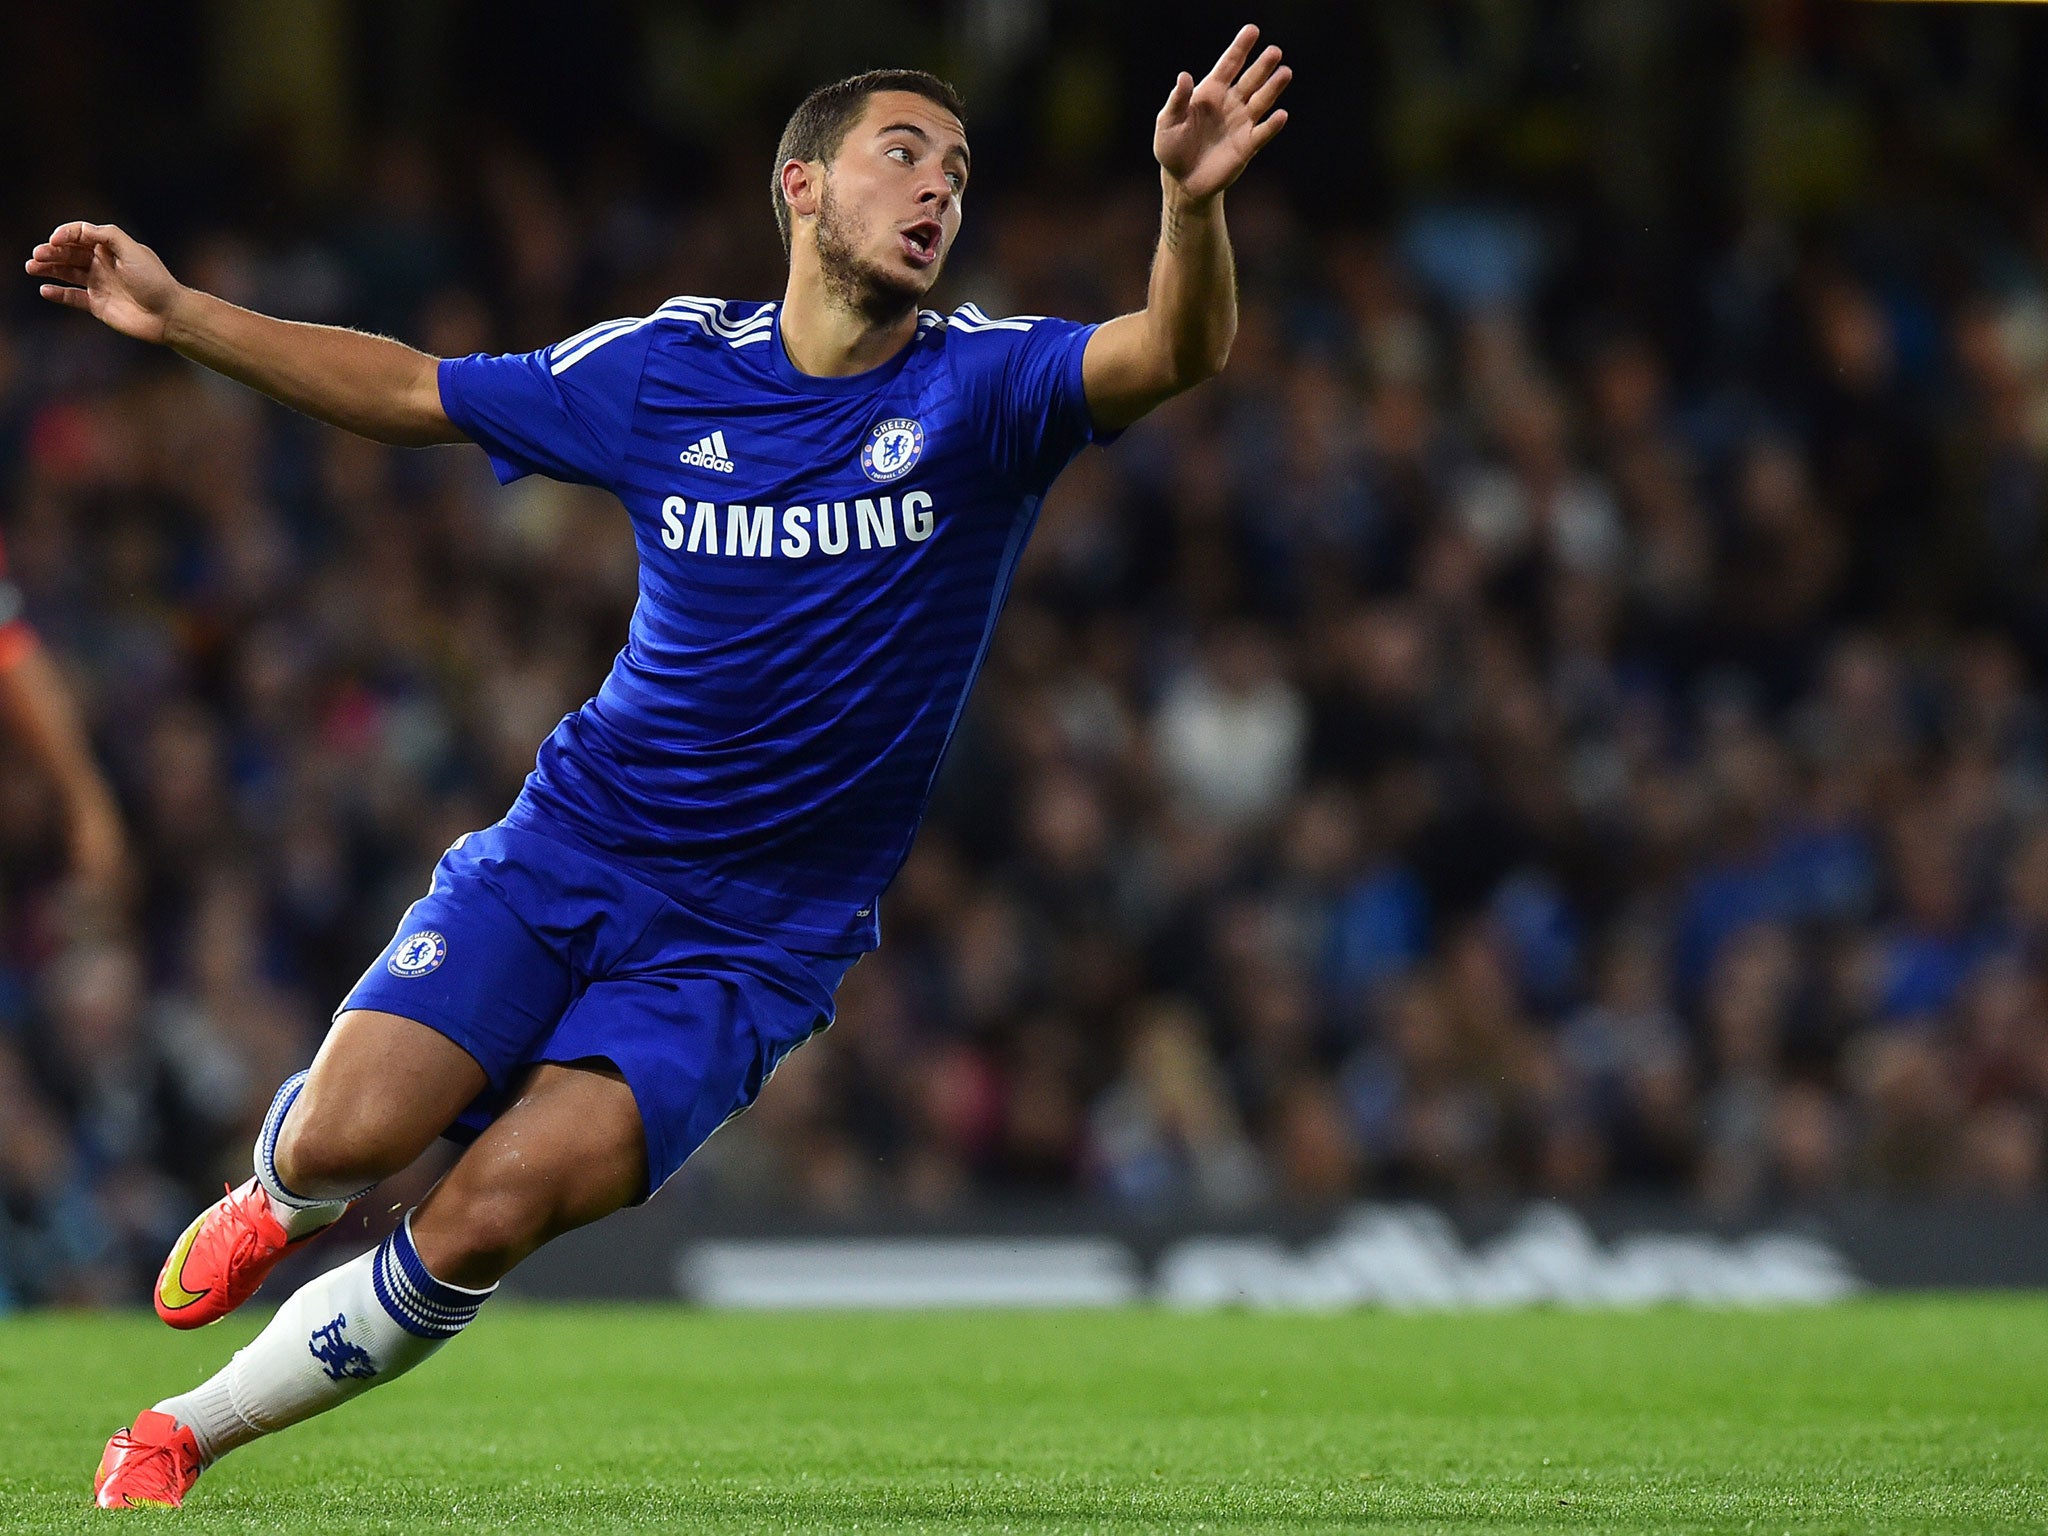 Flotar Túnica Beca Eden Hazard contract: Jose Mourinho confirms Chelsea are in talks with  Hazard over a long-term mega-contract | The Independent | The Independent